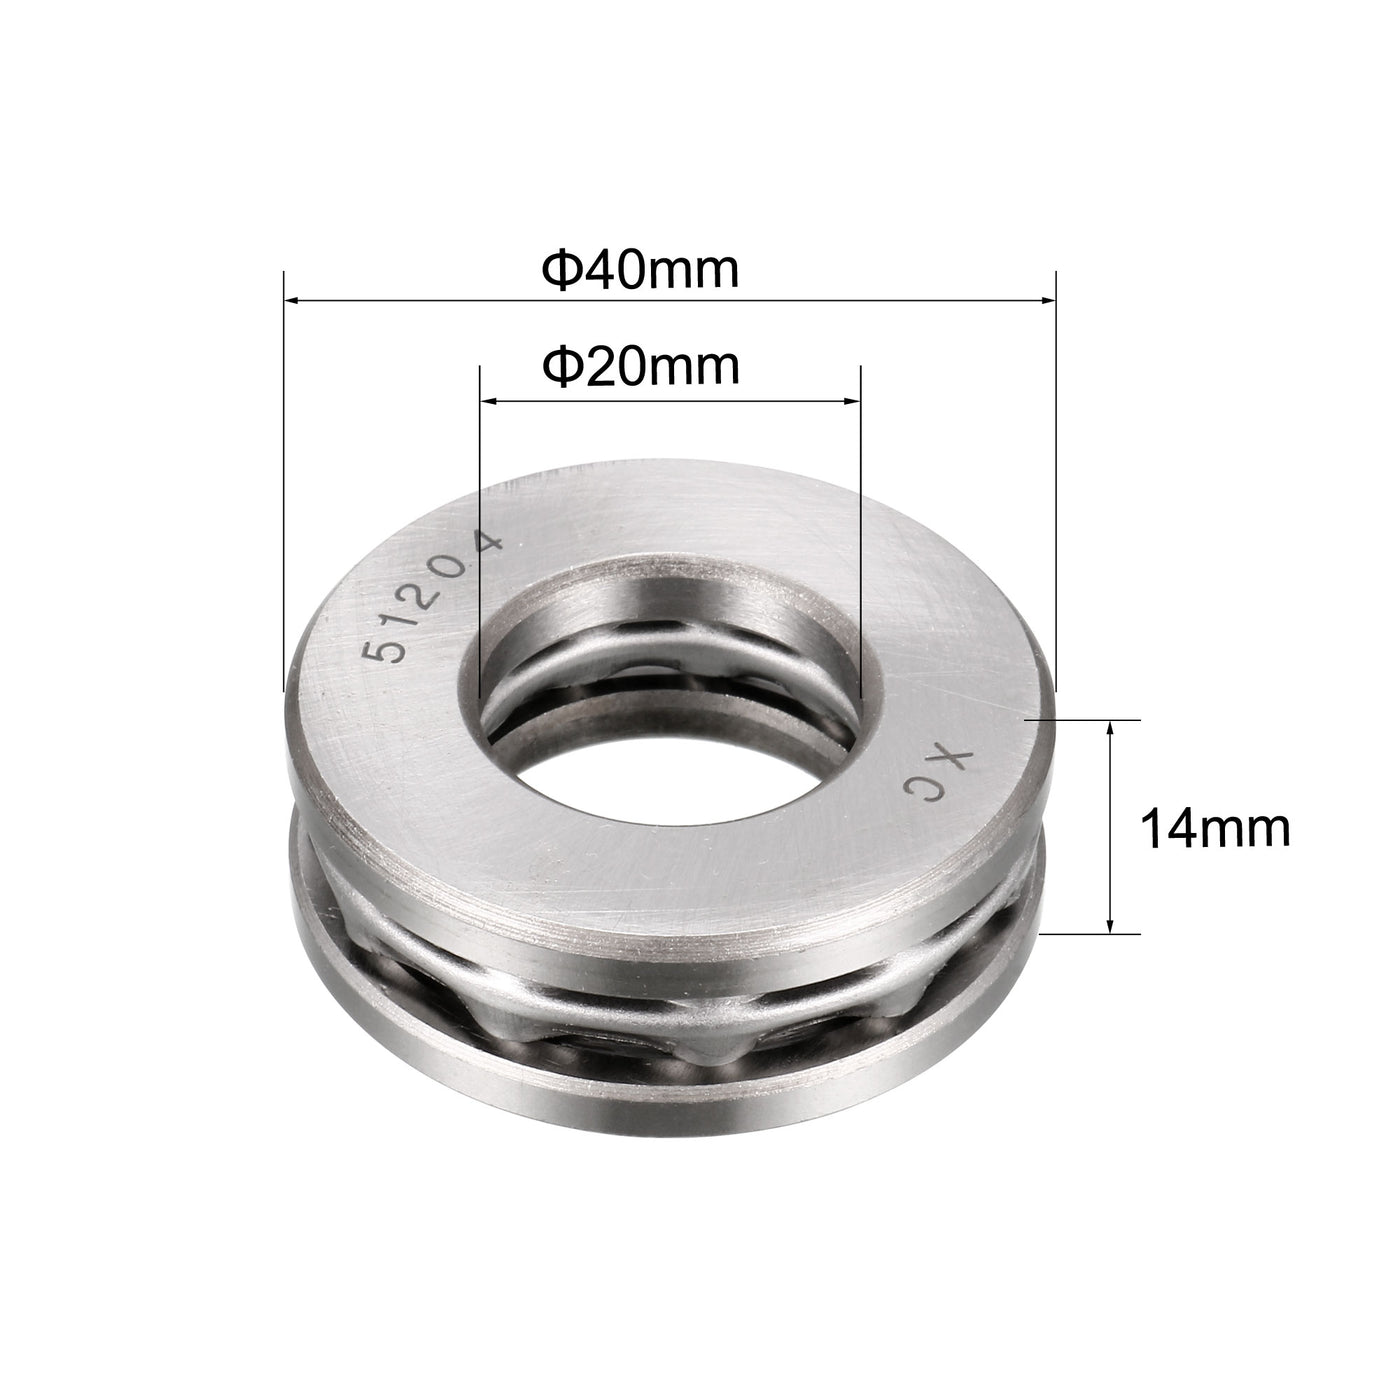 uxcell Uxcell 51204 Miniature Thrust Ball Bearing 20x40x14mm Chrome Steel with Washer 2pcs